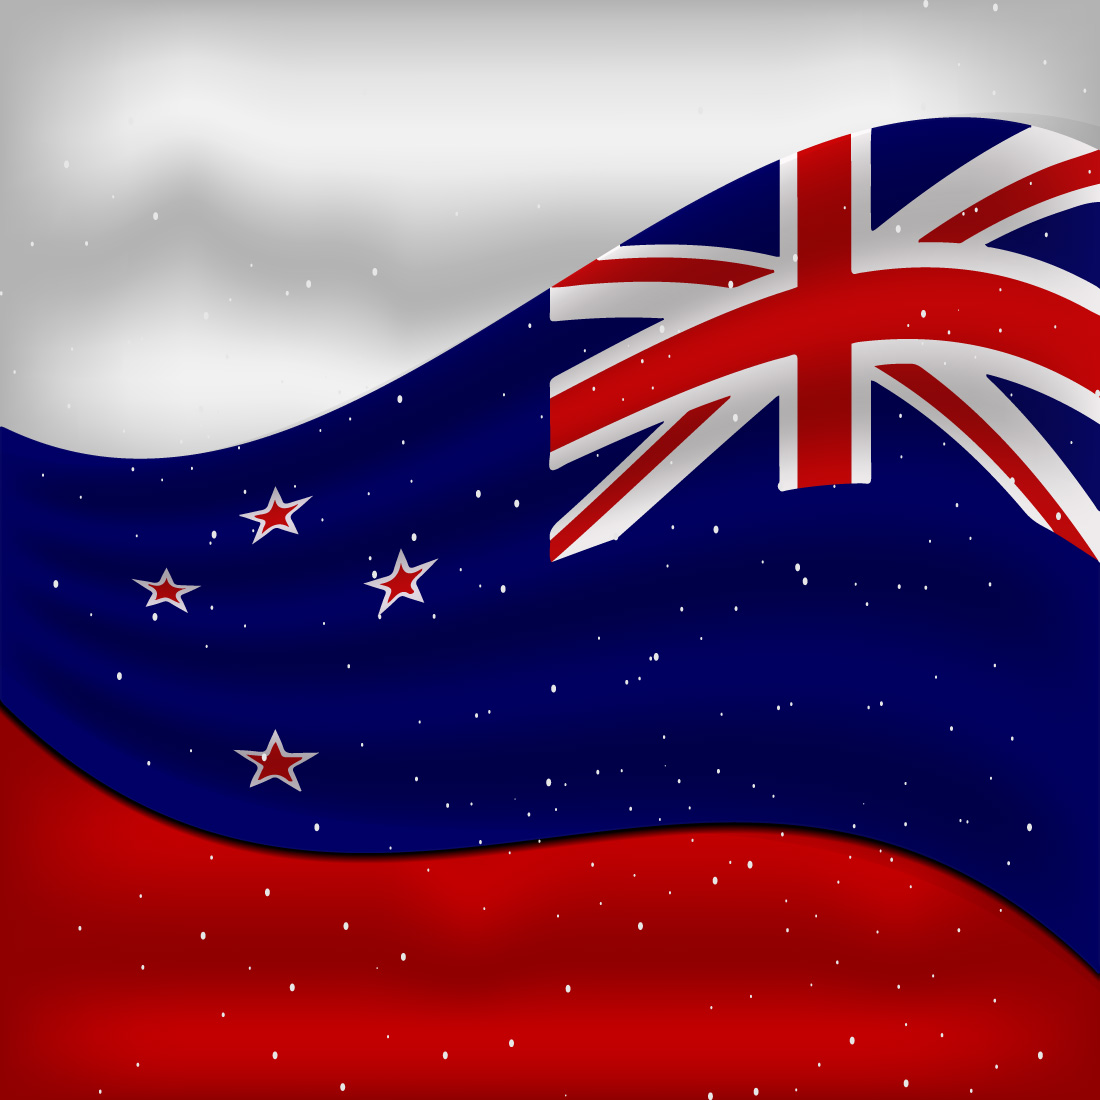 Unique image of the flag of New Zealand.